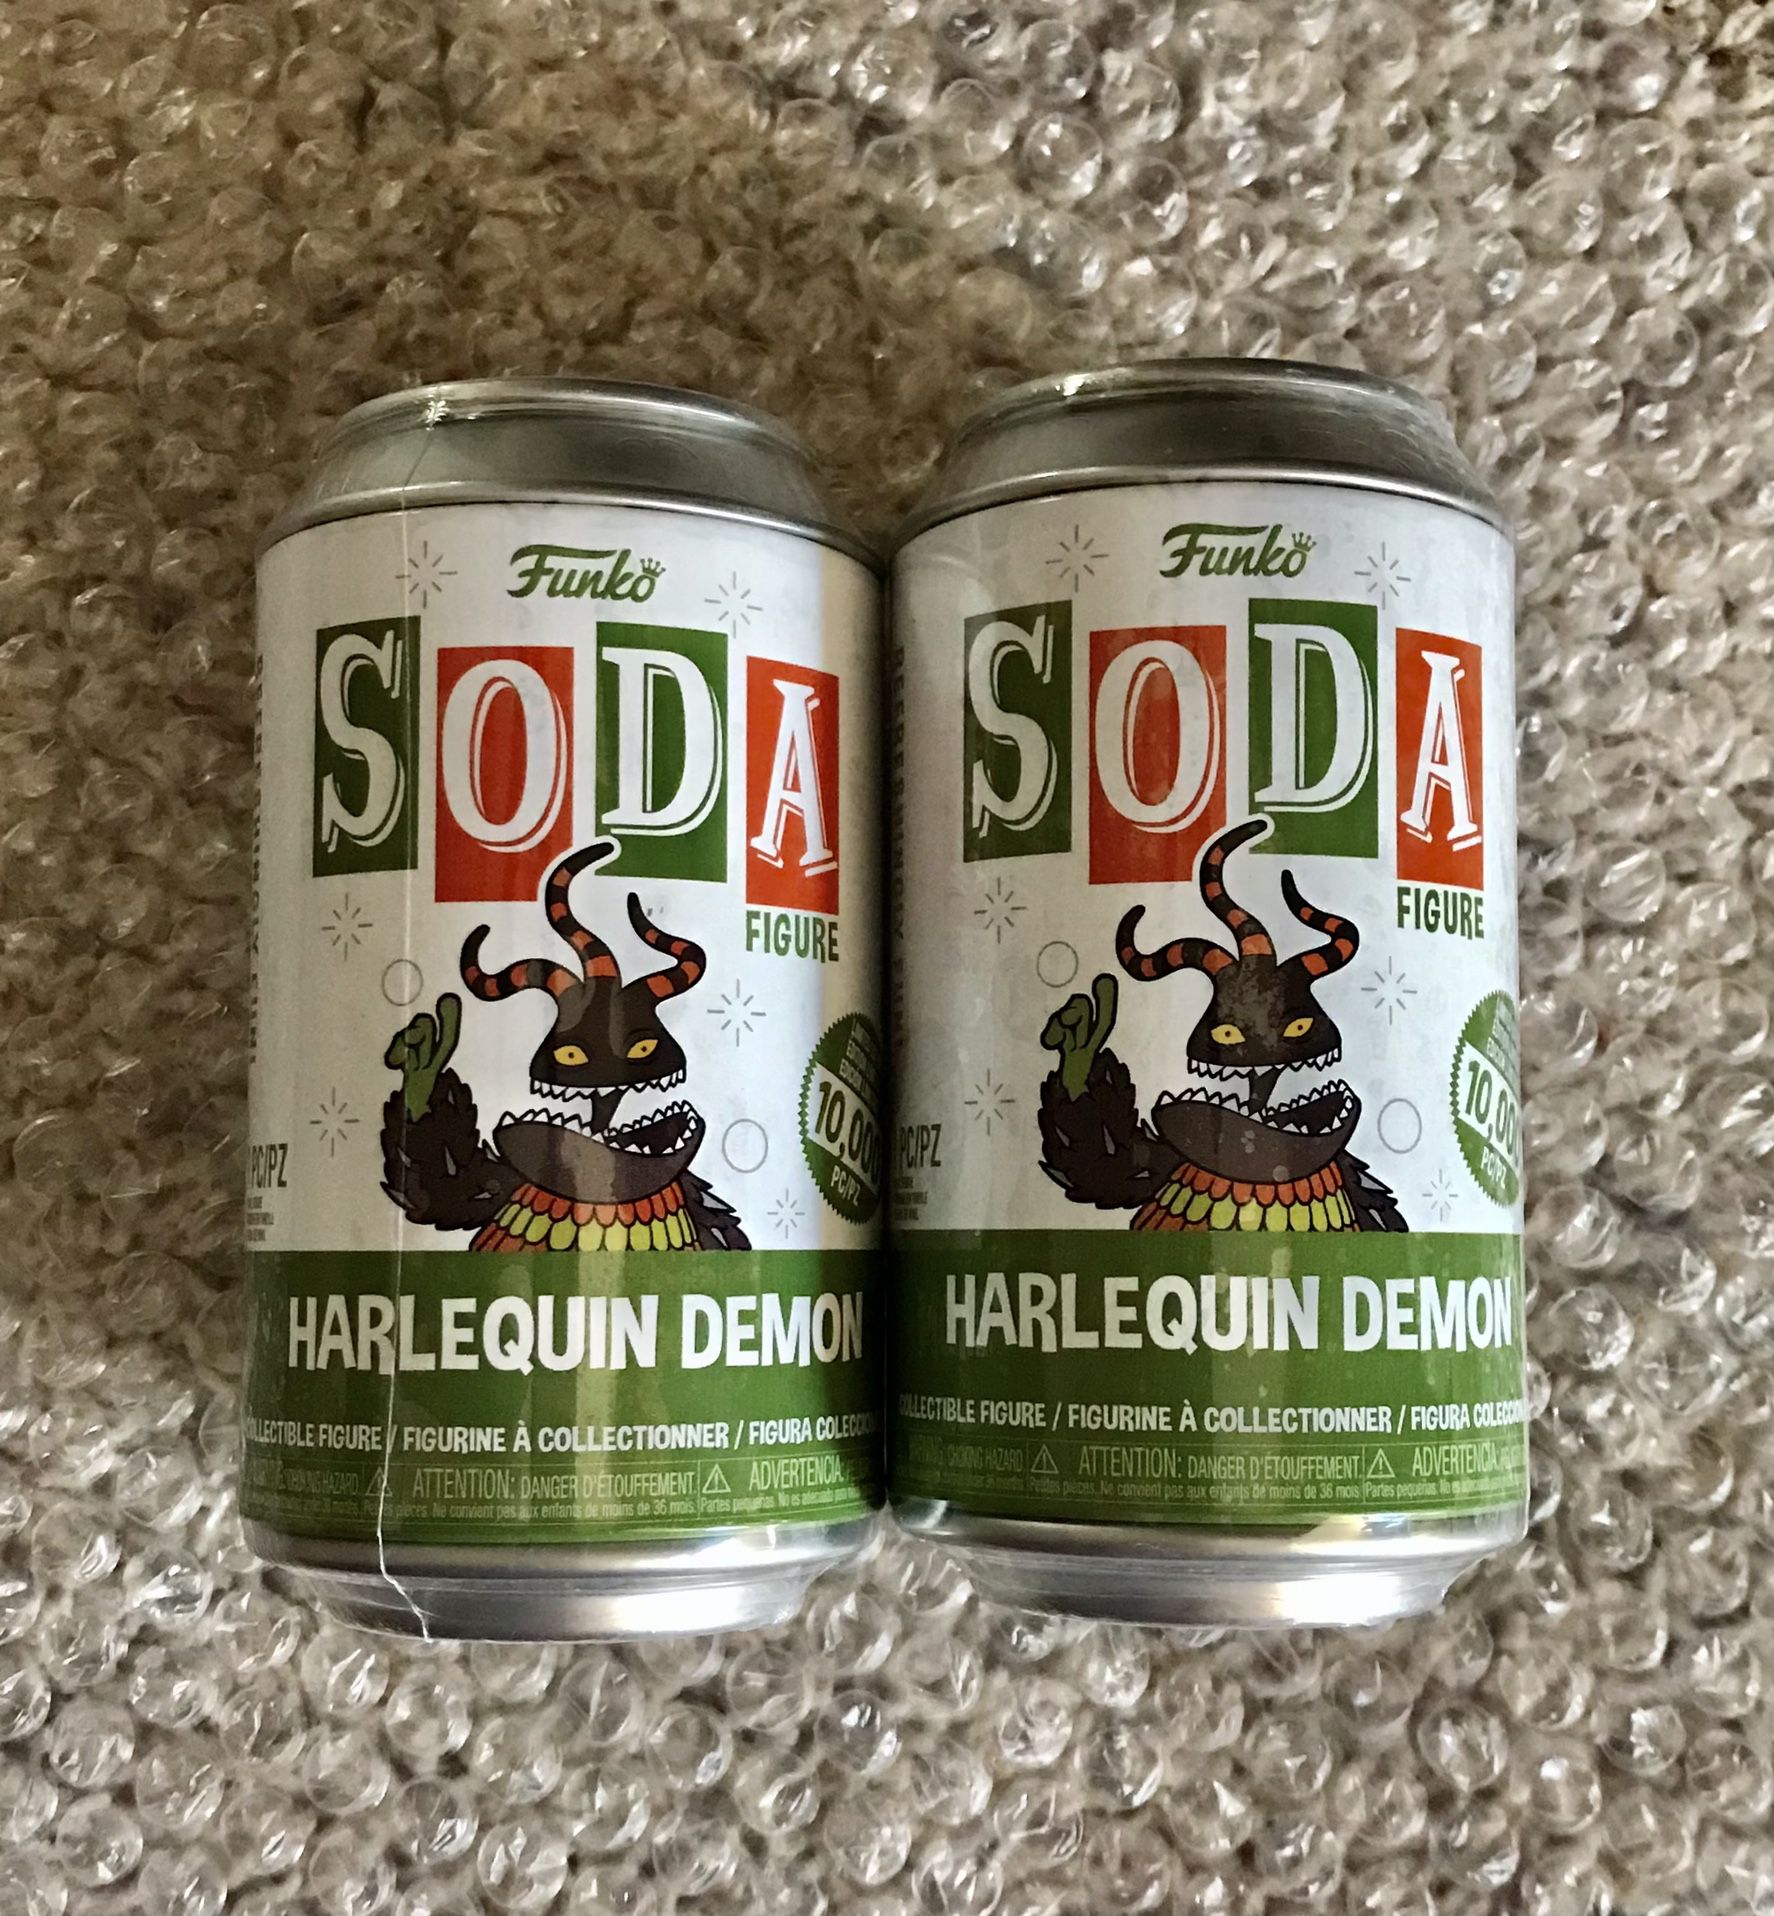 Funko SODA POP! Harlequin Demon 2 Sealed Cans LE Pieces NEW! I have multiple Sodas and different kinds if your interested!